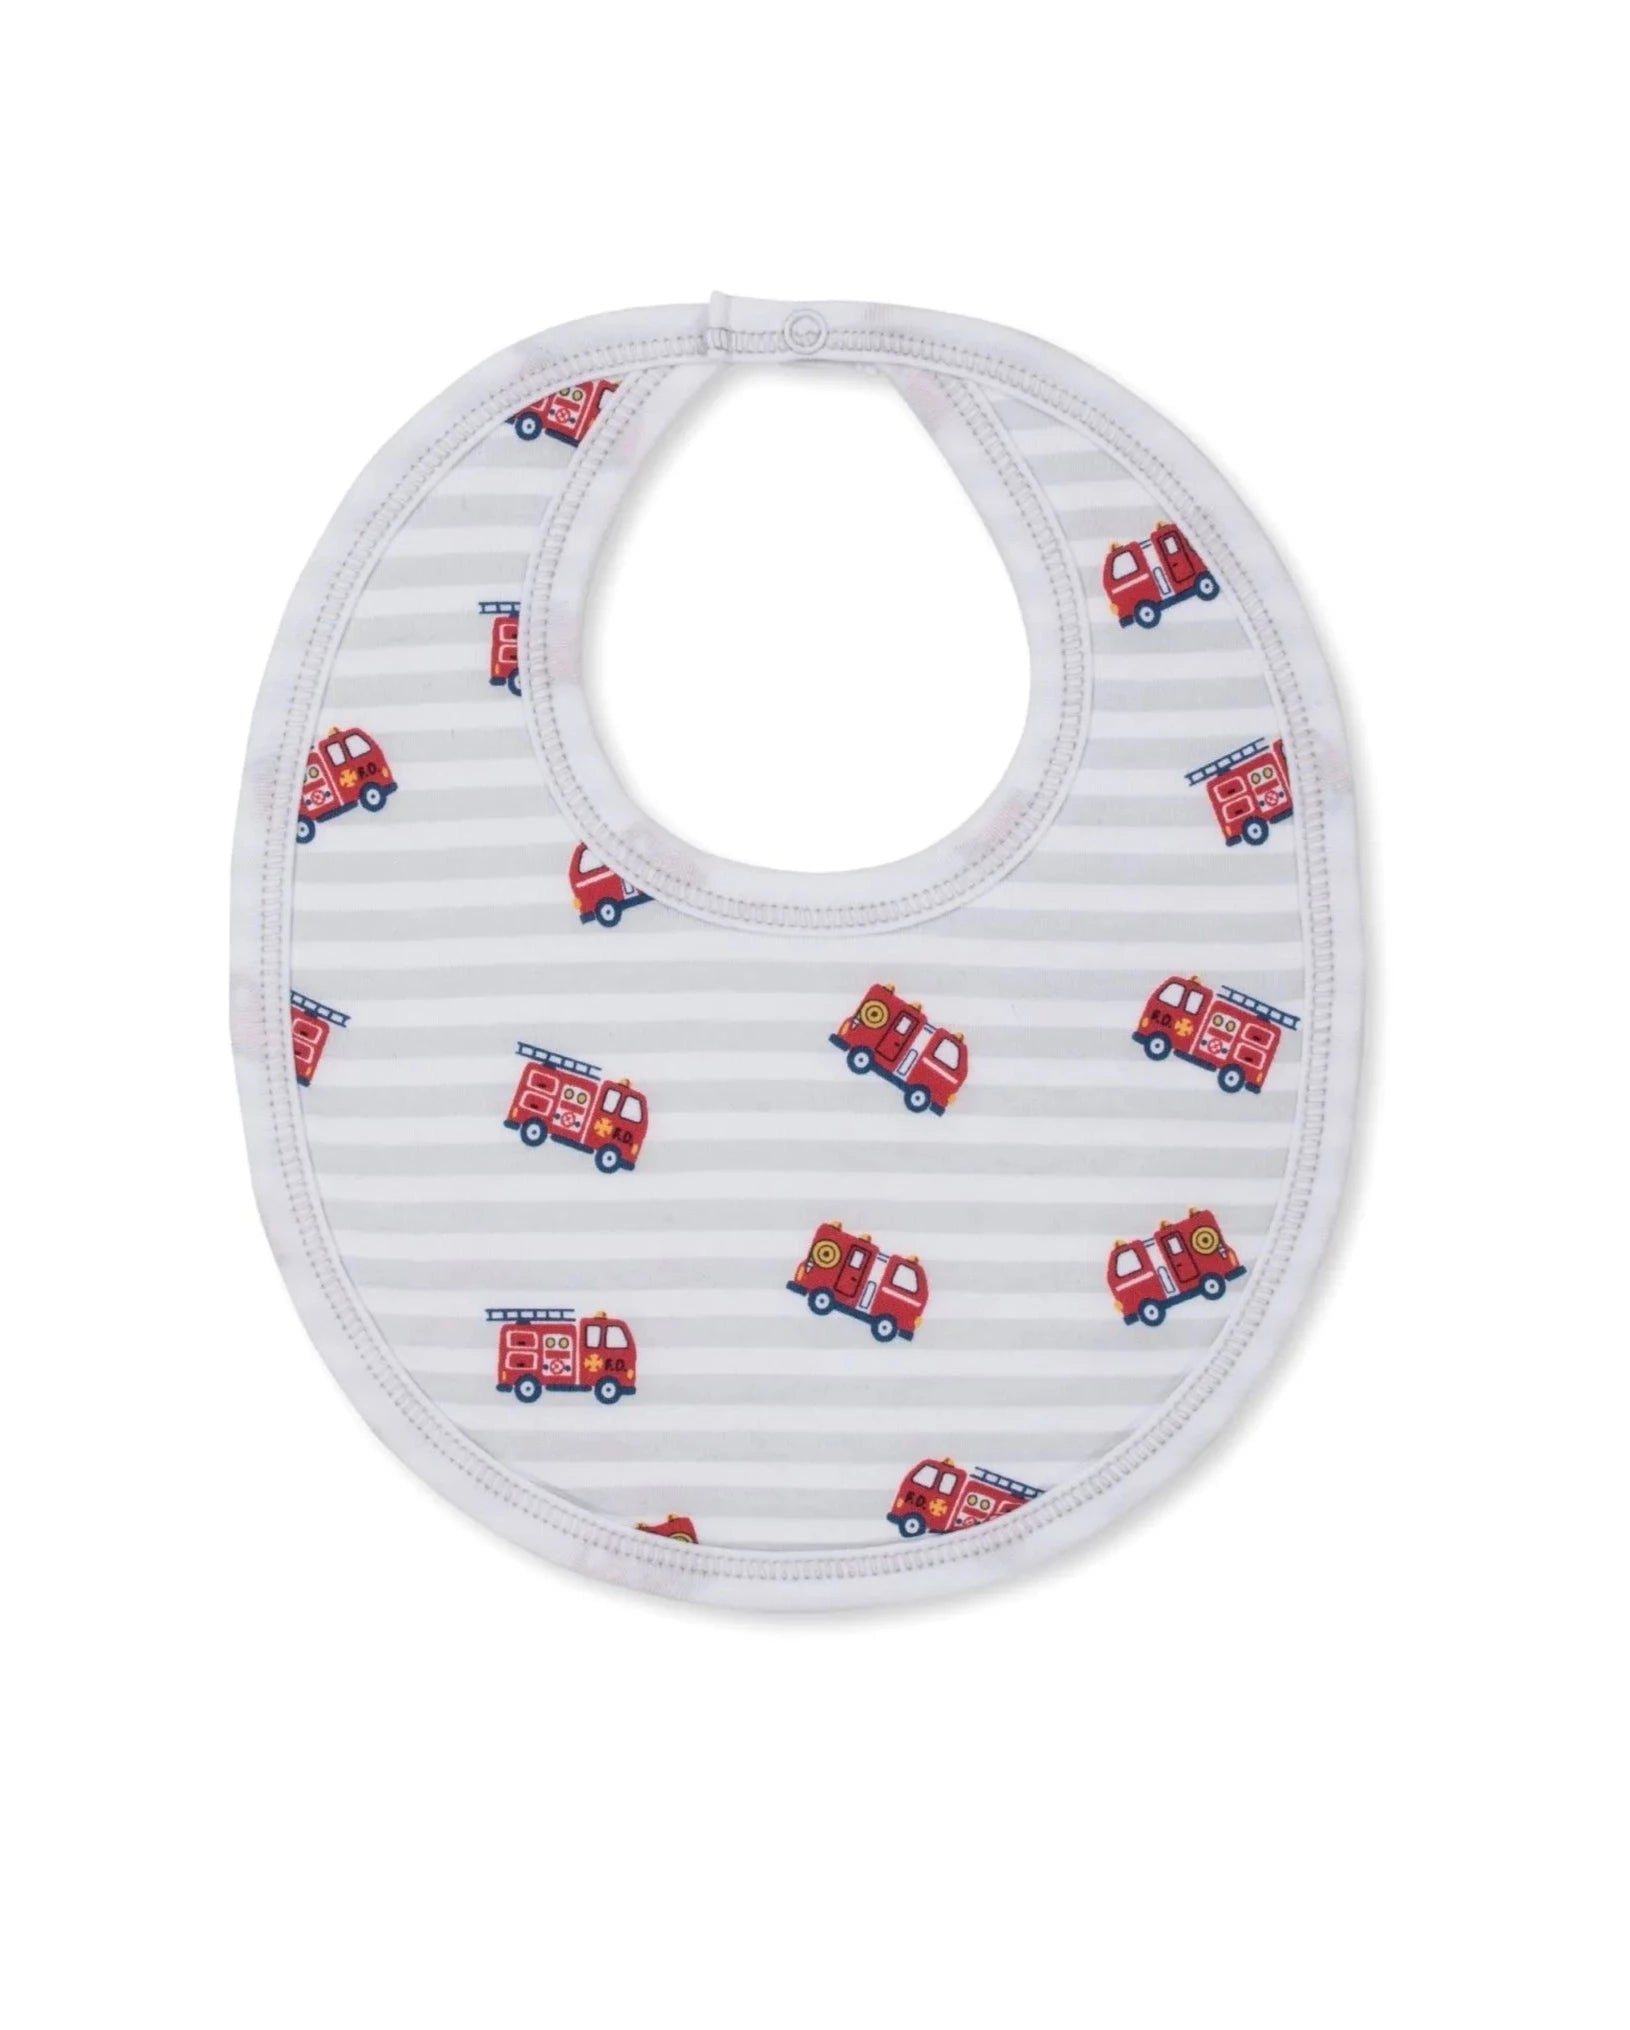 grey and white striped bib with red firetrucks all over